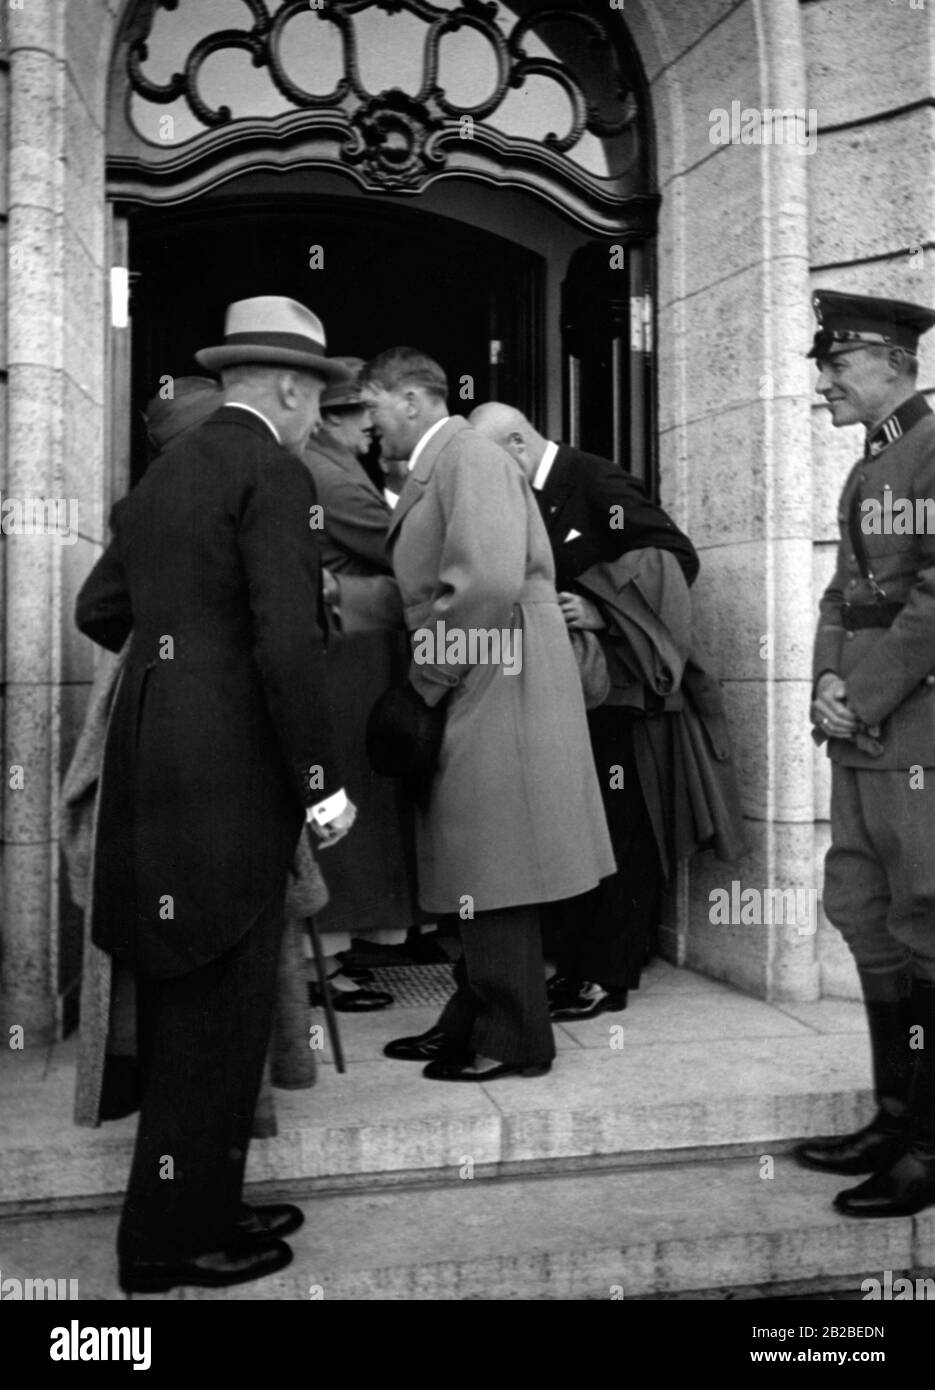 Adolf Hitler and Vice Chancellor Franz von Papen (left) at the entrance of the Neudeck estate in the former East Prussia. Gut Neudeck was in the possession of Reich President Paul von Hindenburg until he died there in 1934. Stock Photo